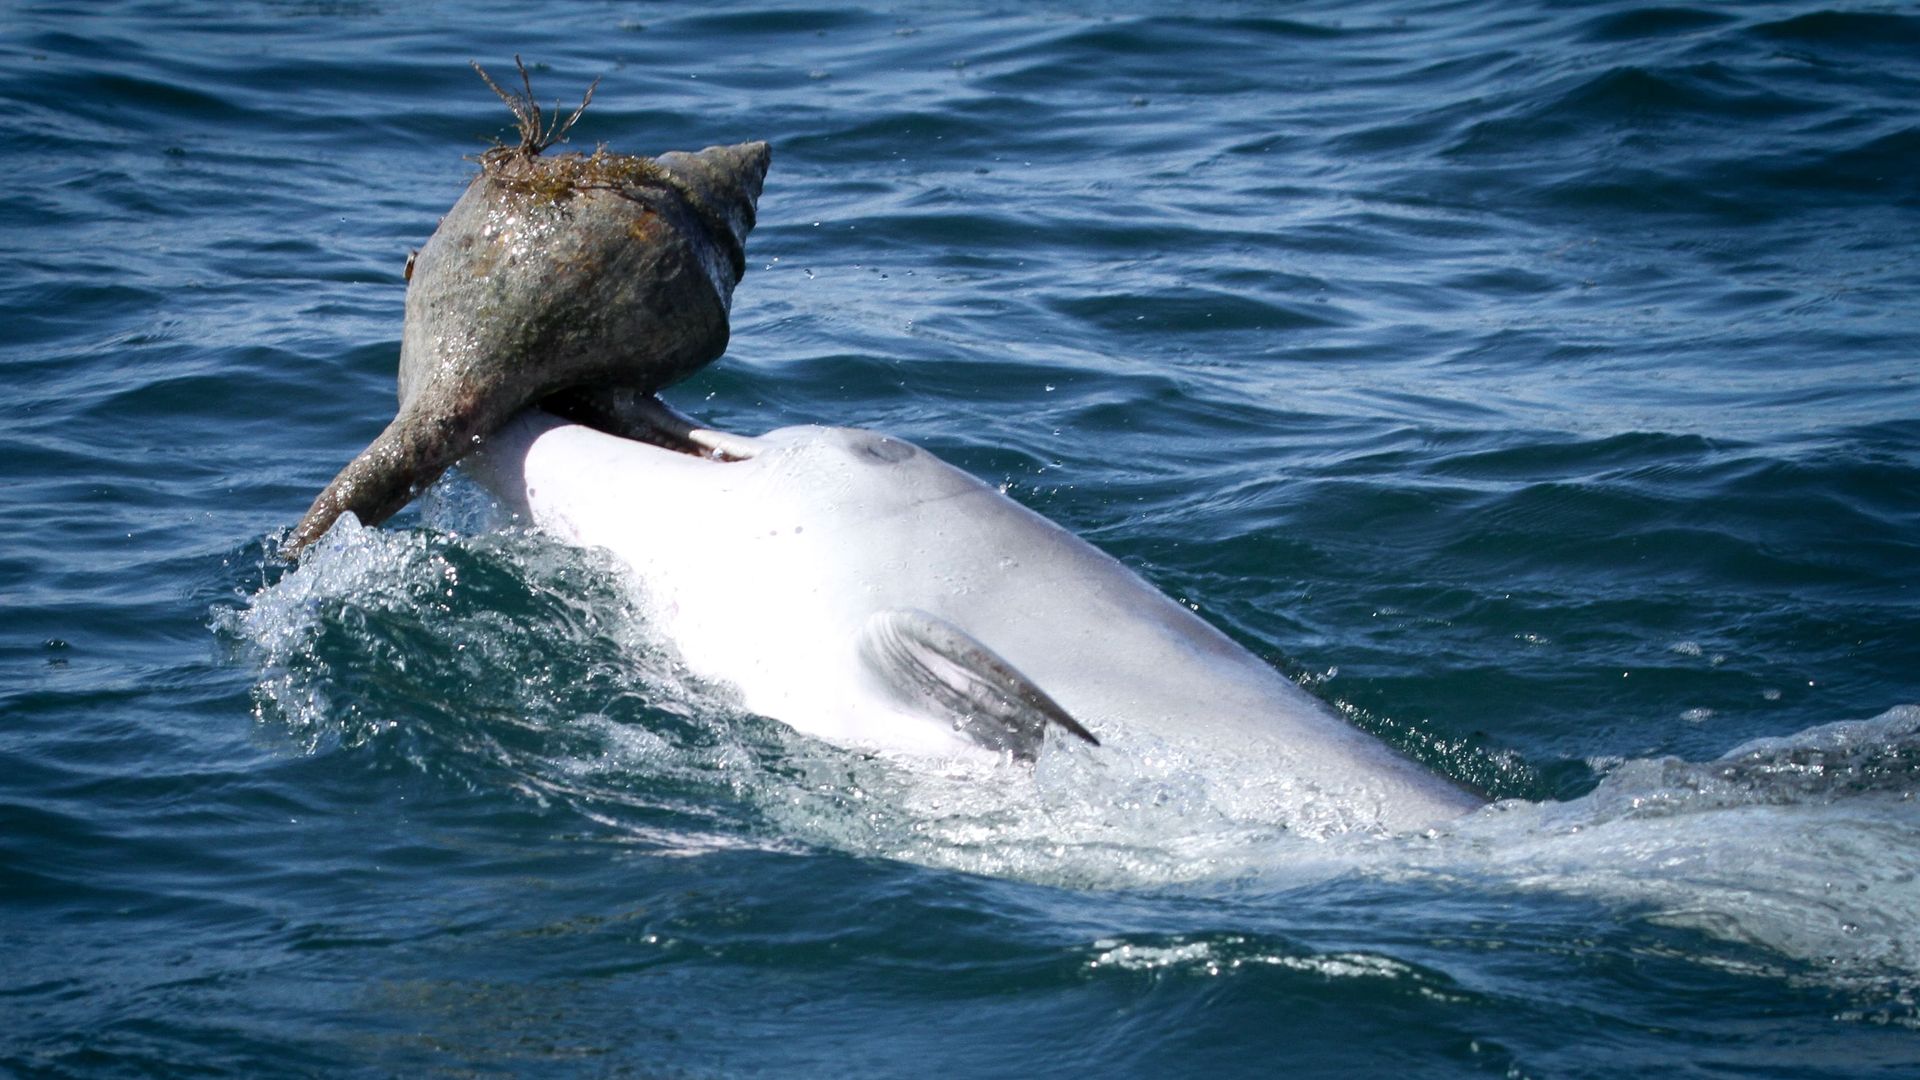 A dolphin shelling